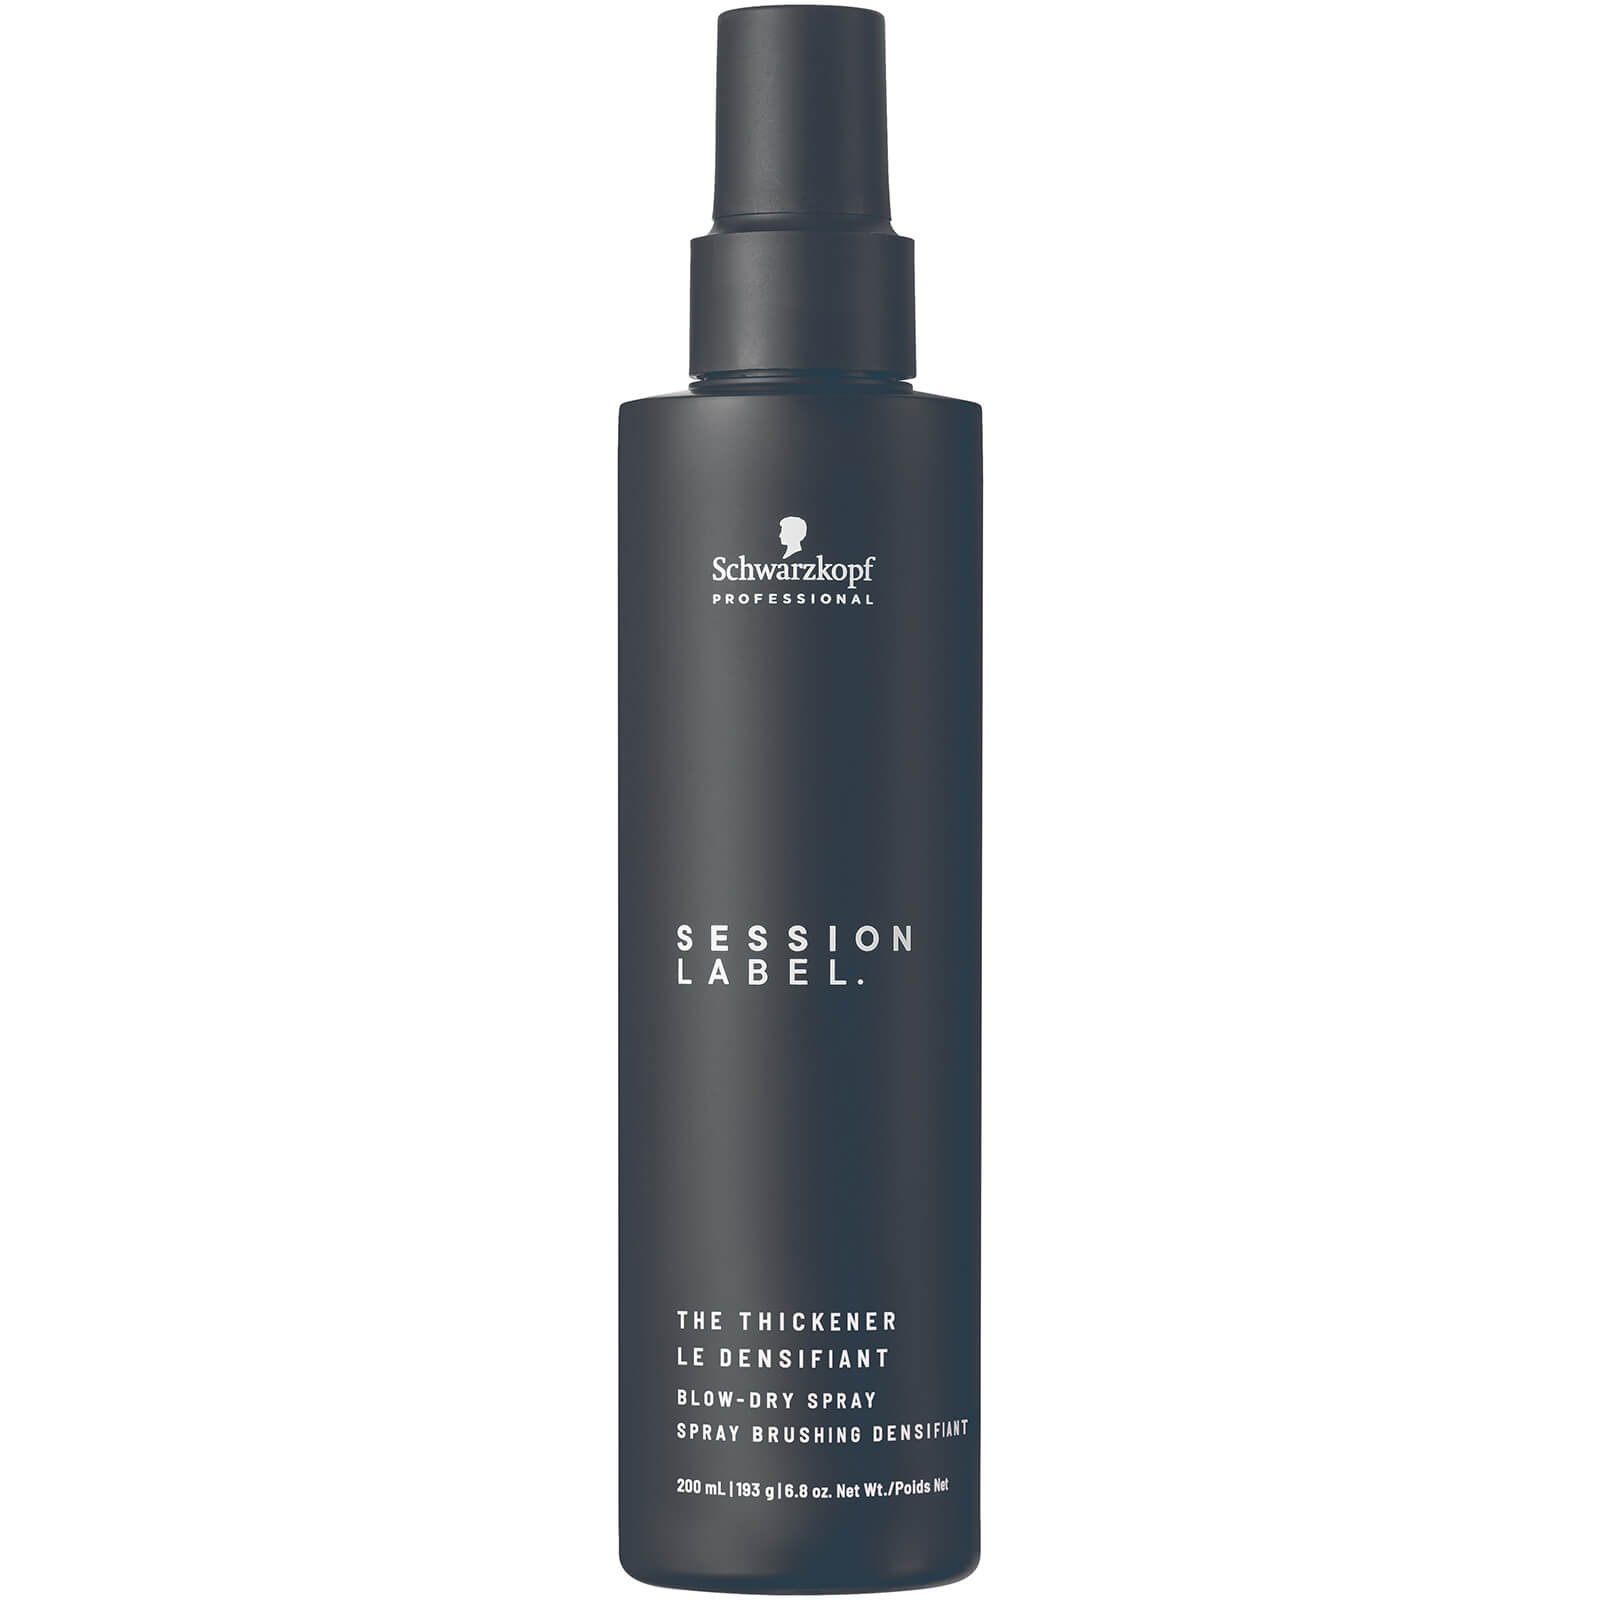 Schwarzkopf Professional Session Label The Thickener Spray 200ml product